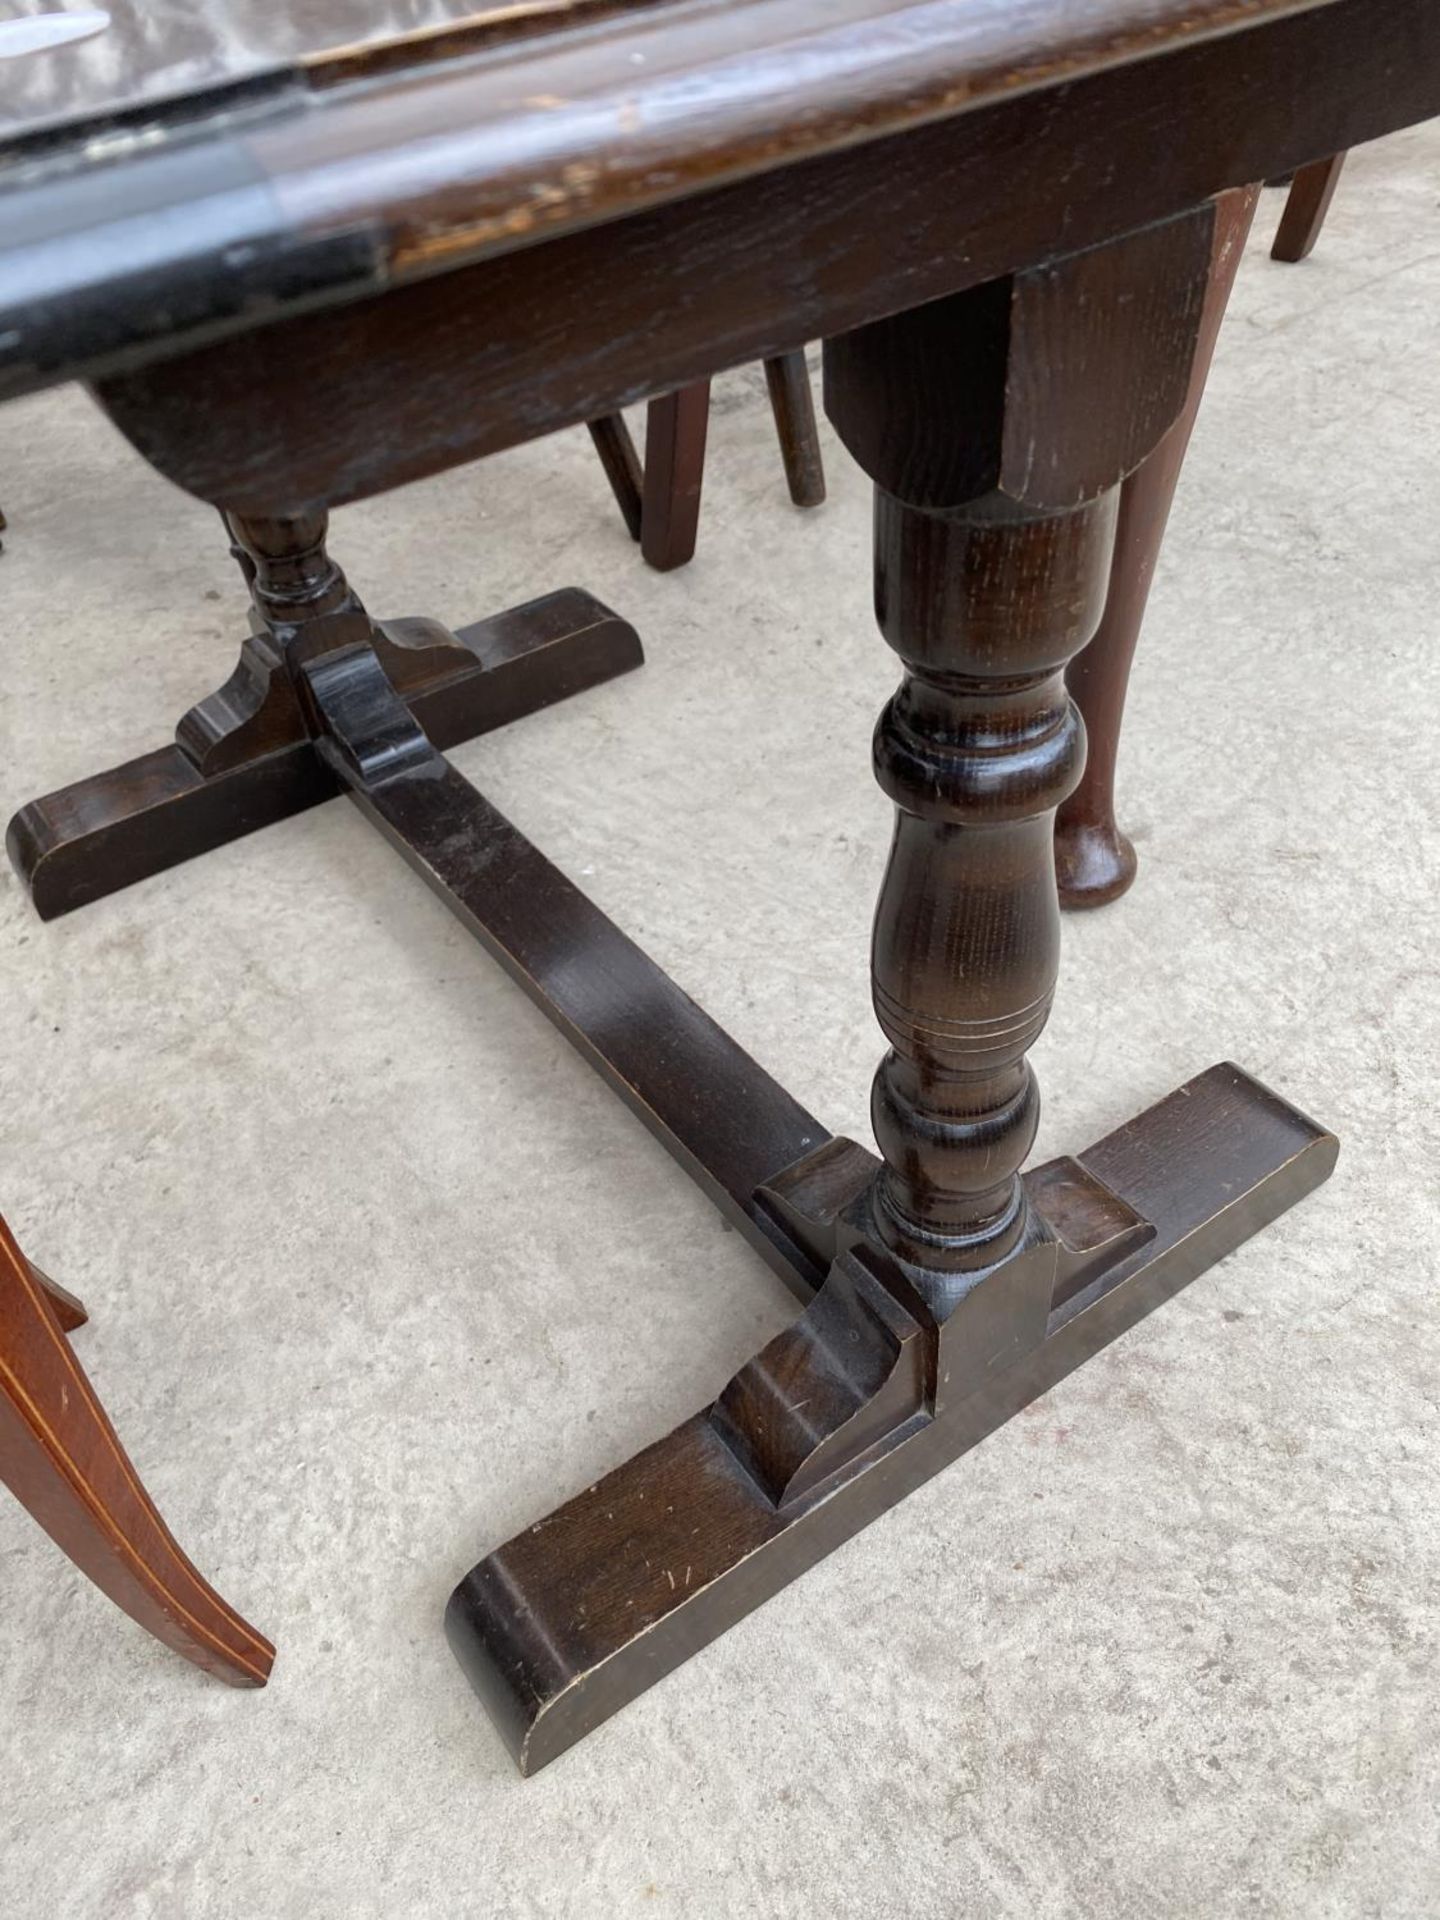 AN ITALIAN INLAID MAHOGANY SEWING TABLE WITH HINGED TOP AND A MAHOGANY COFFEE TABLE - Image 5 of 5